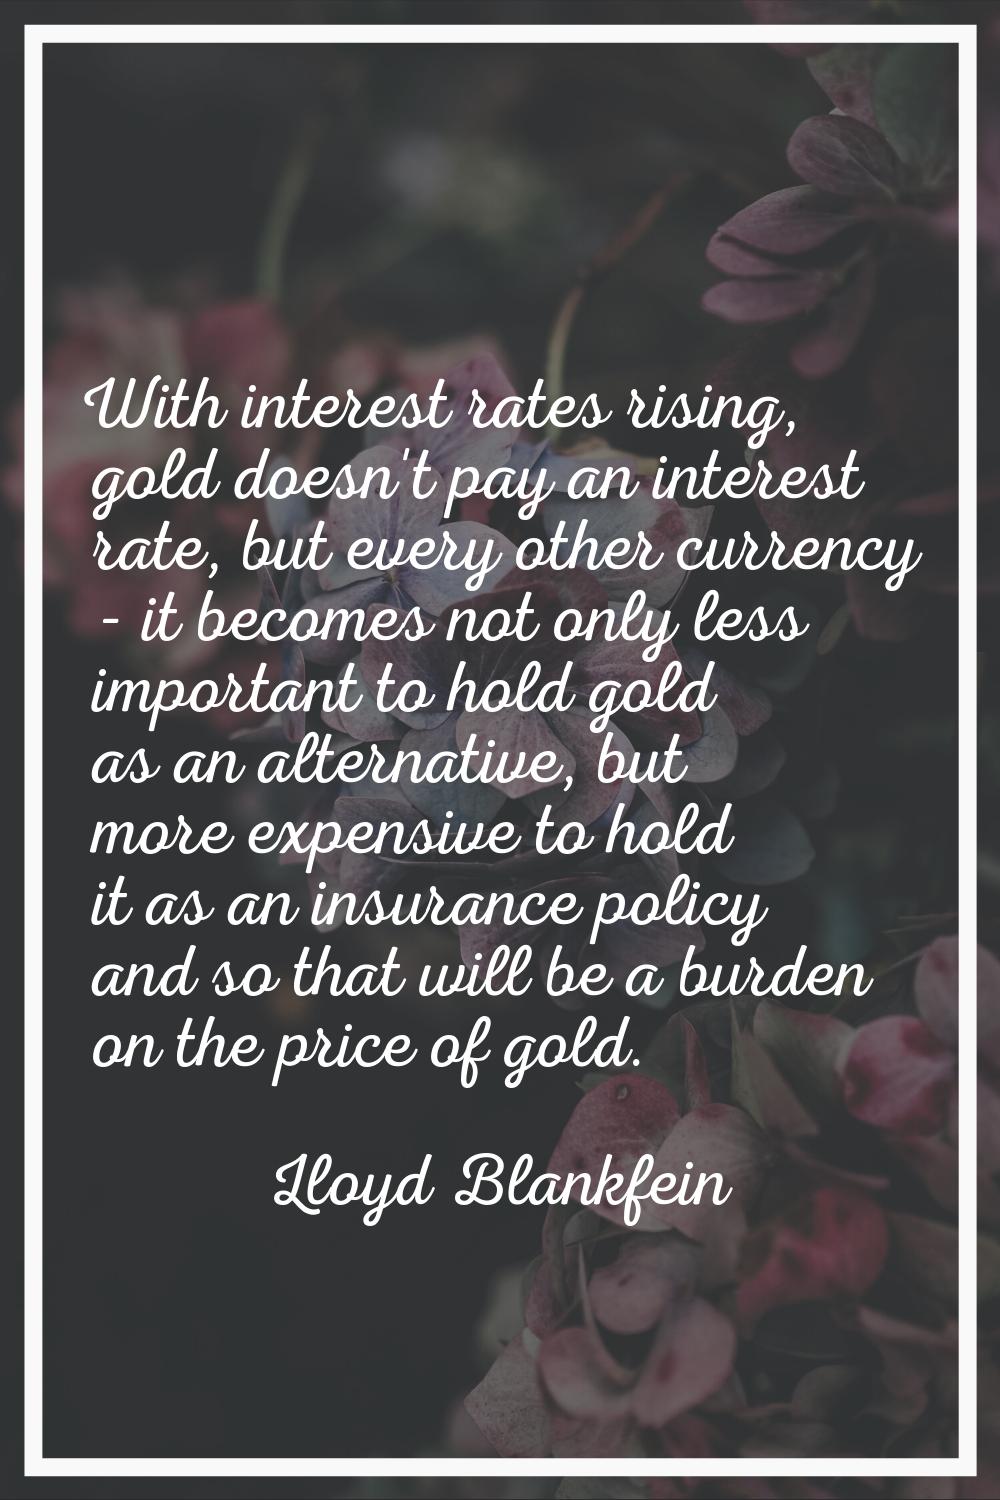 With interest rates rising, gold doesn't pay an interest rate, but every other currency - it become